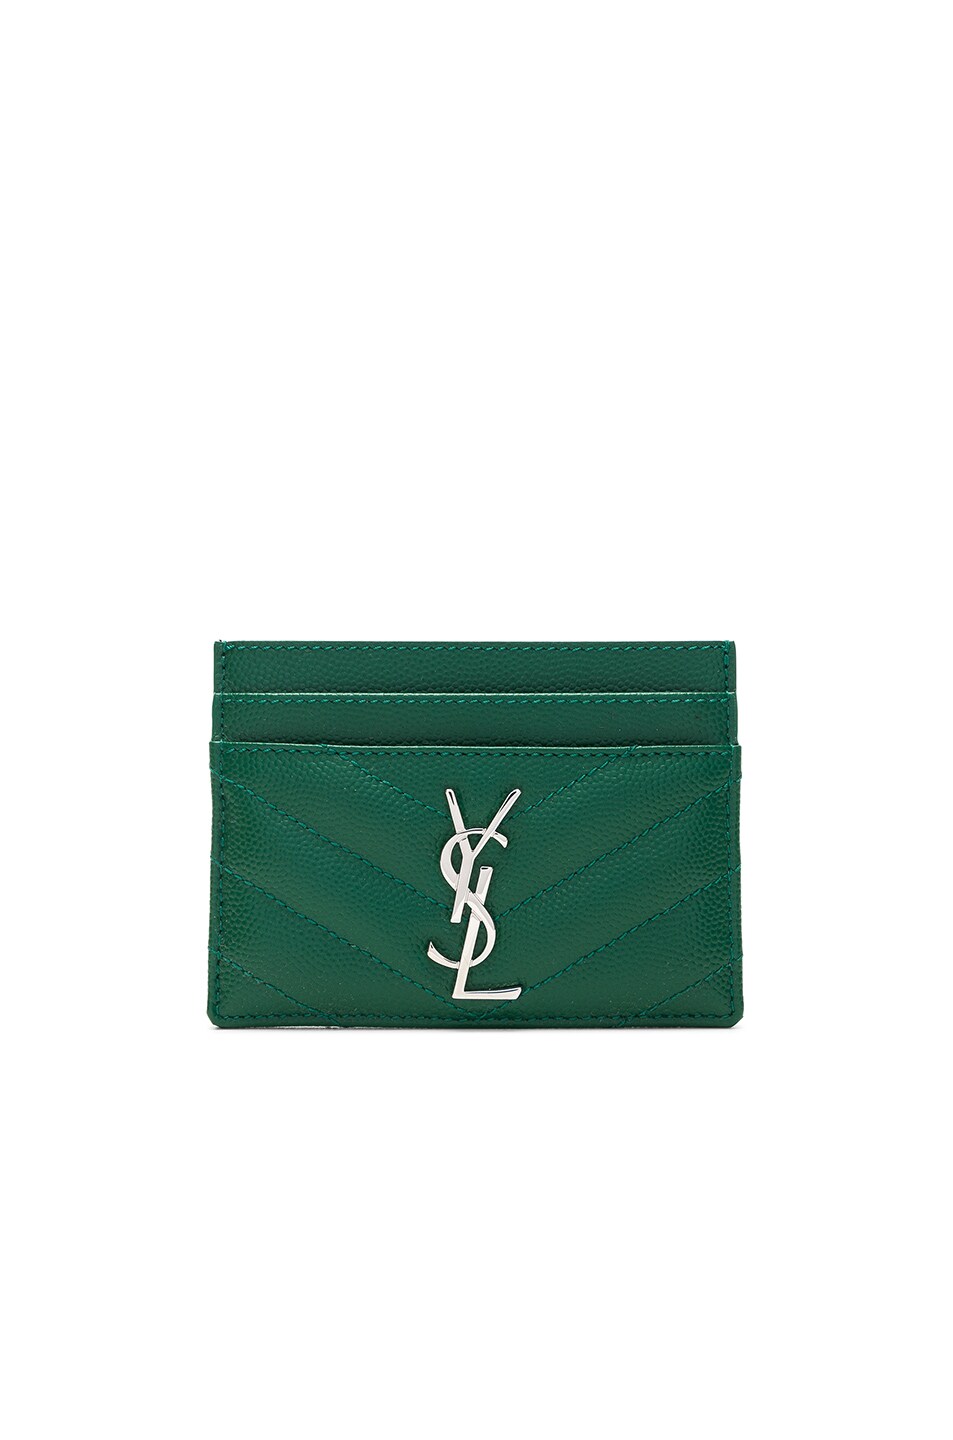 Image 1 of Saint Laurent Monogramme Card Case in Grass